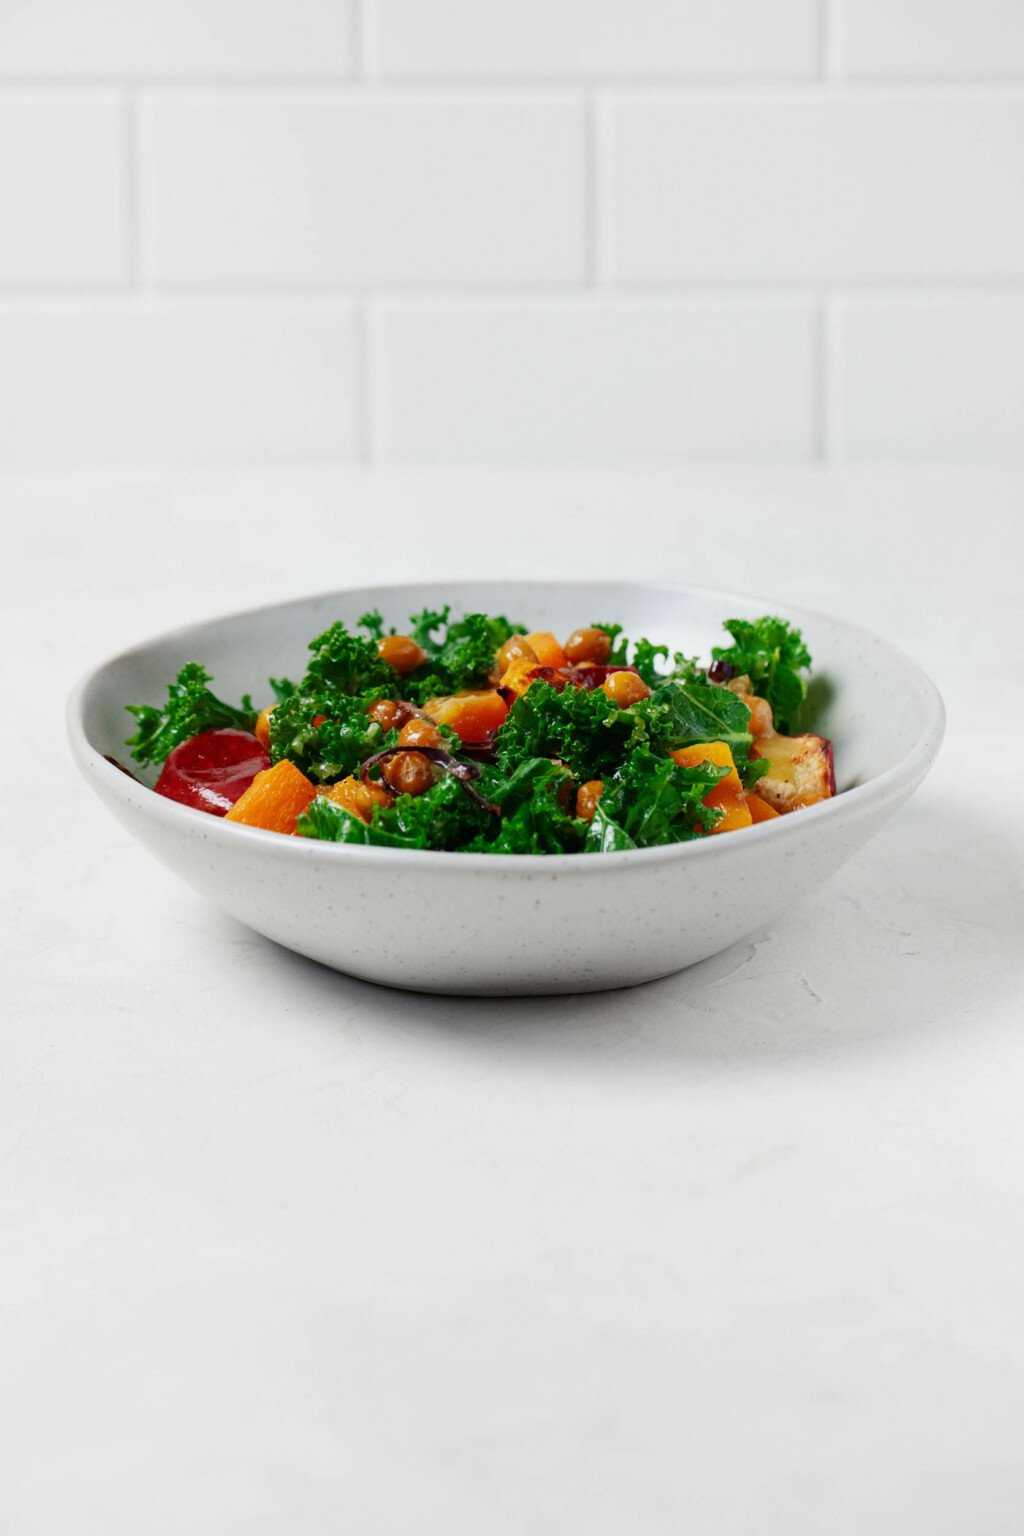 A shallow white bowl is pictured against a white tile backdrop. It contains a vibrant, green kale salad.